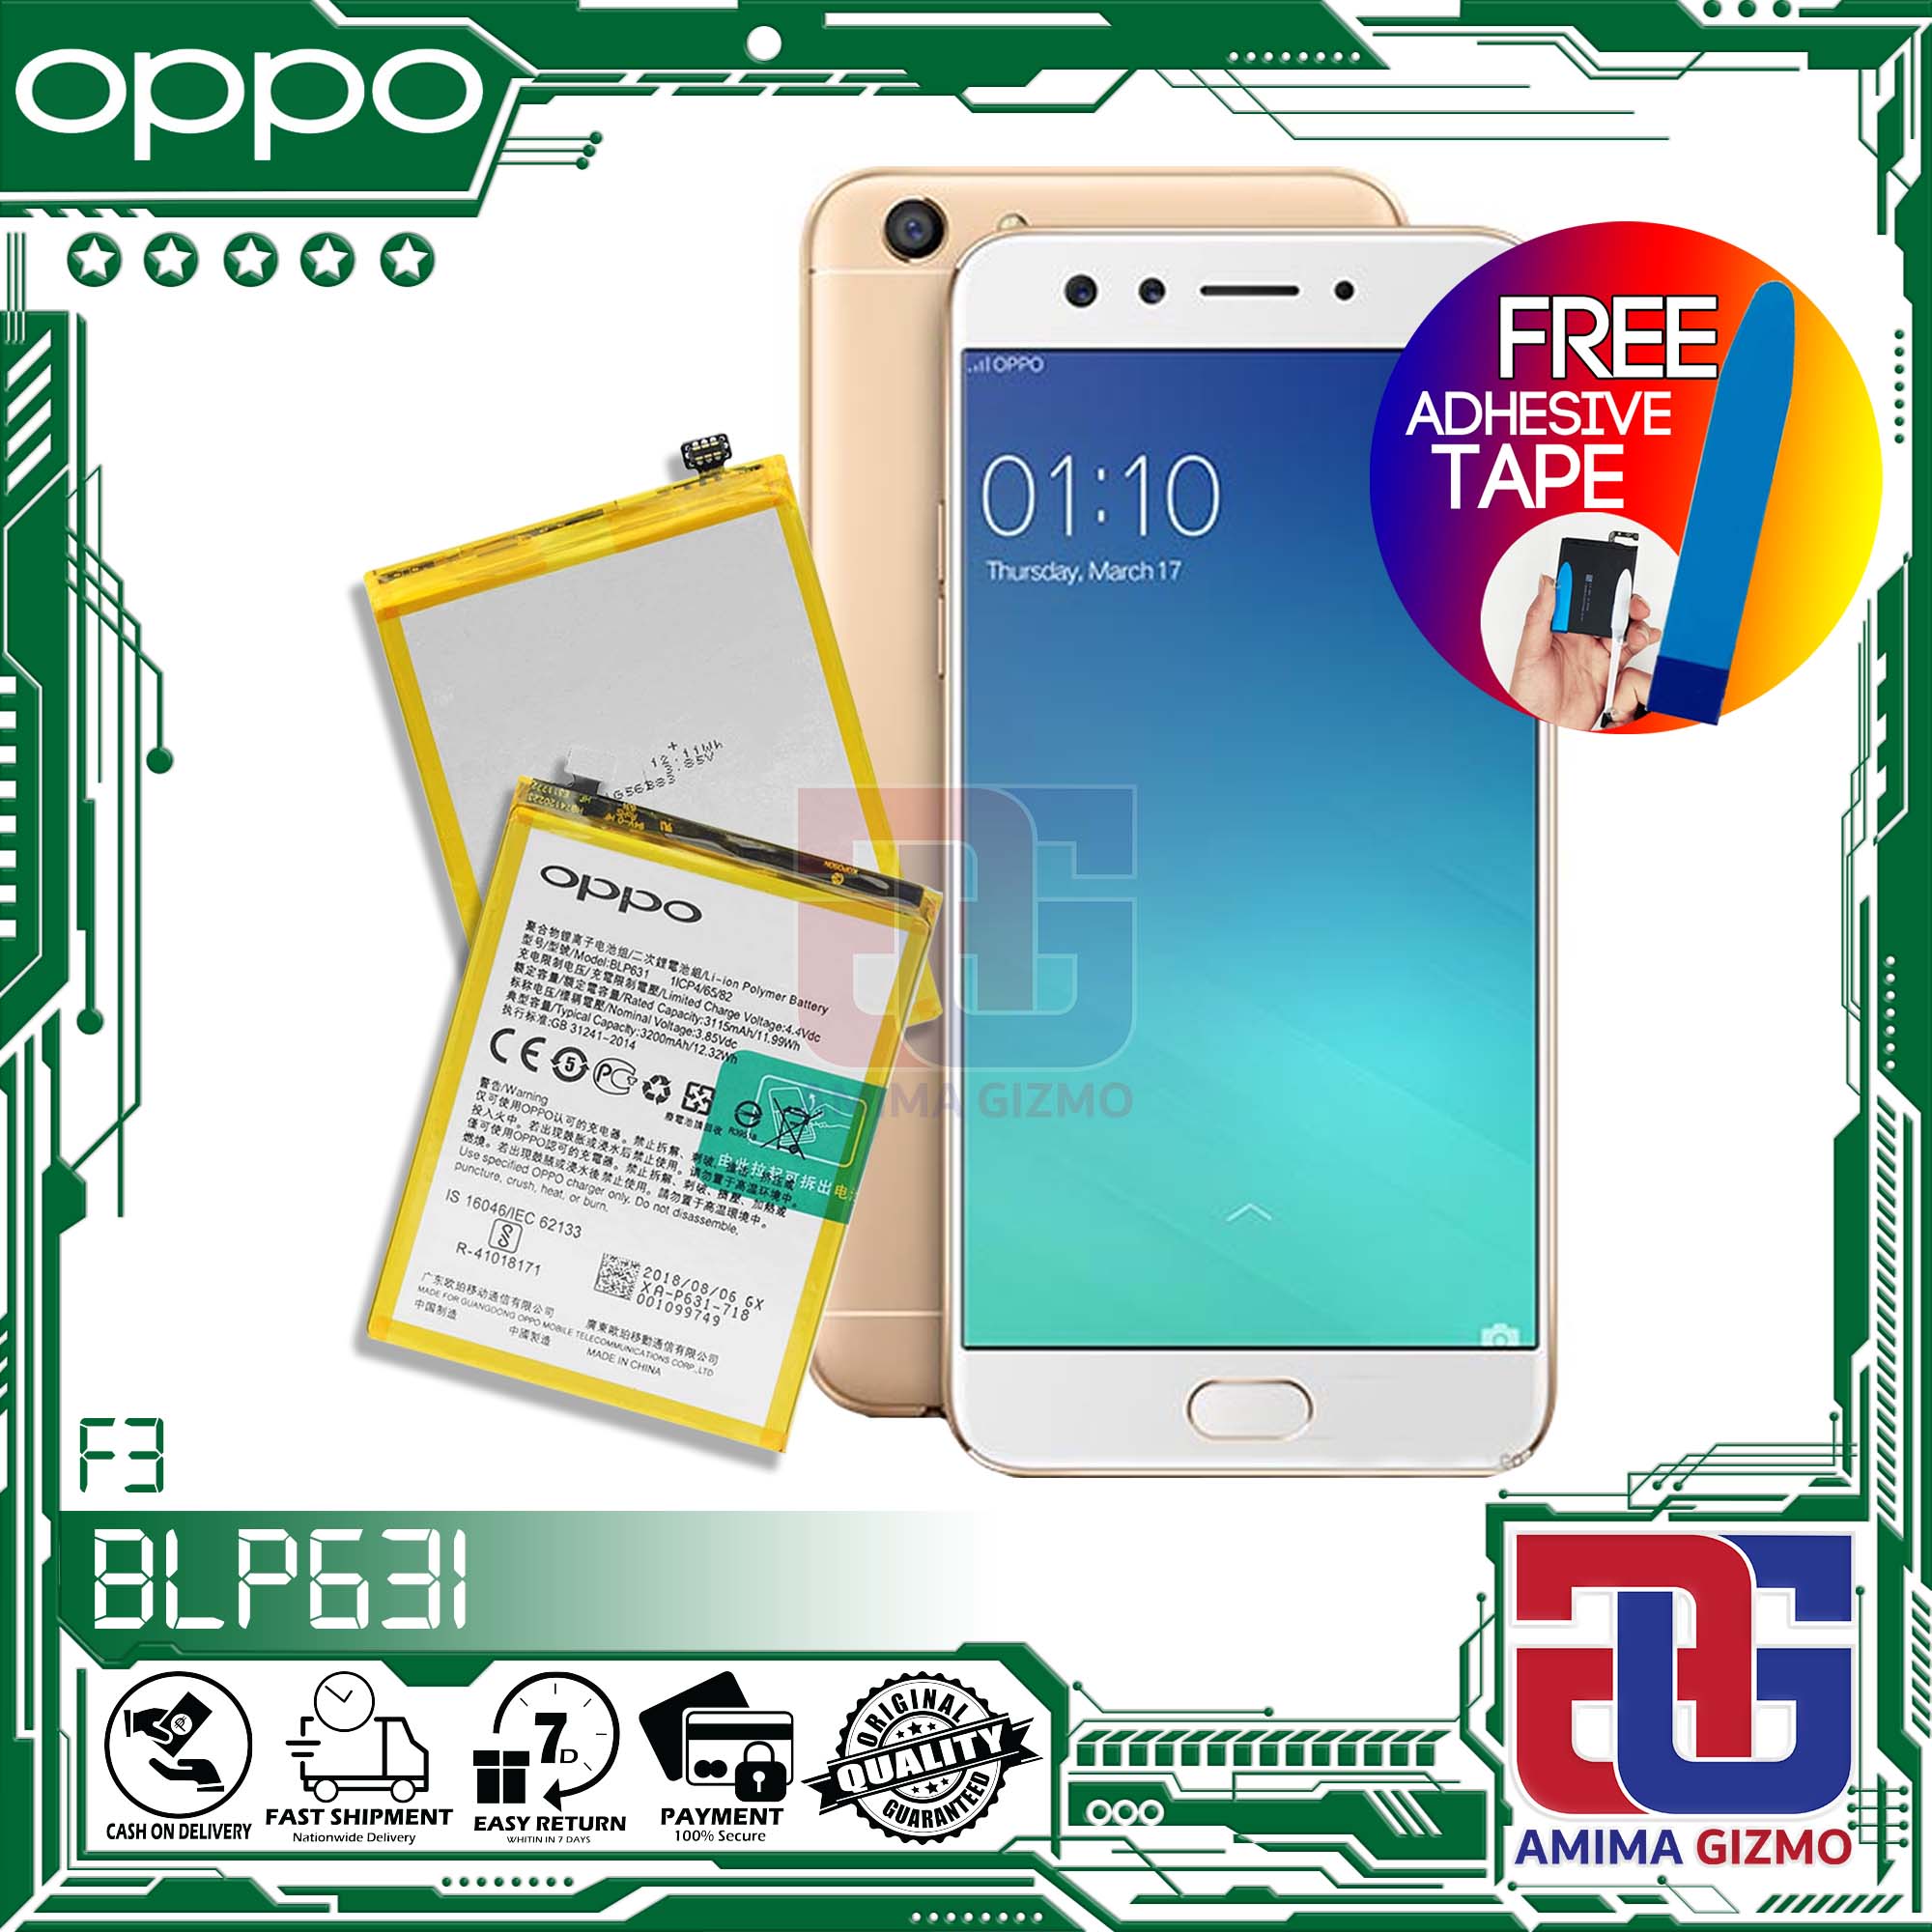 Oppo F3 Battery Model As Original Battery Of Authentic Smartphone Blp631 Amima Gizmo Lithium Ion And Capacity Replacement Same Size Support Fast Charger Long Lasting And Free Adhesive Tape 17 Lazada Ph